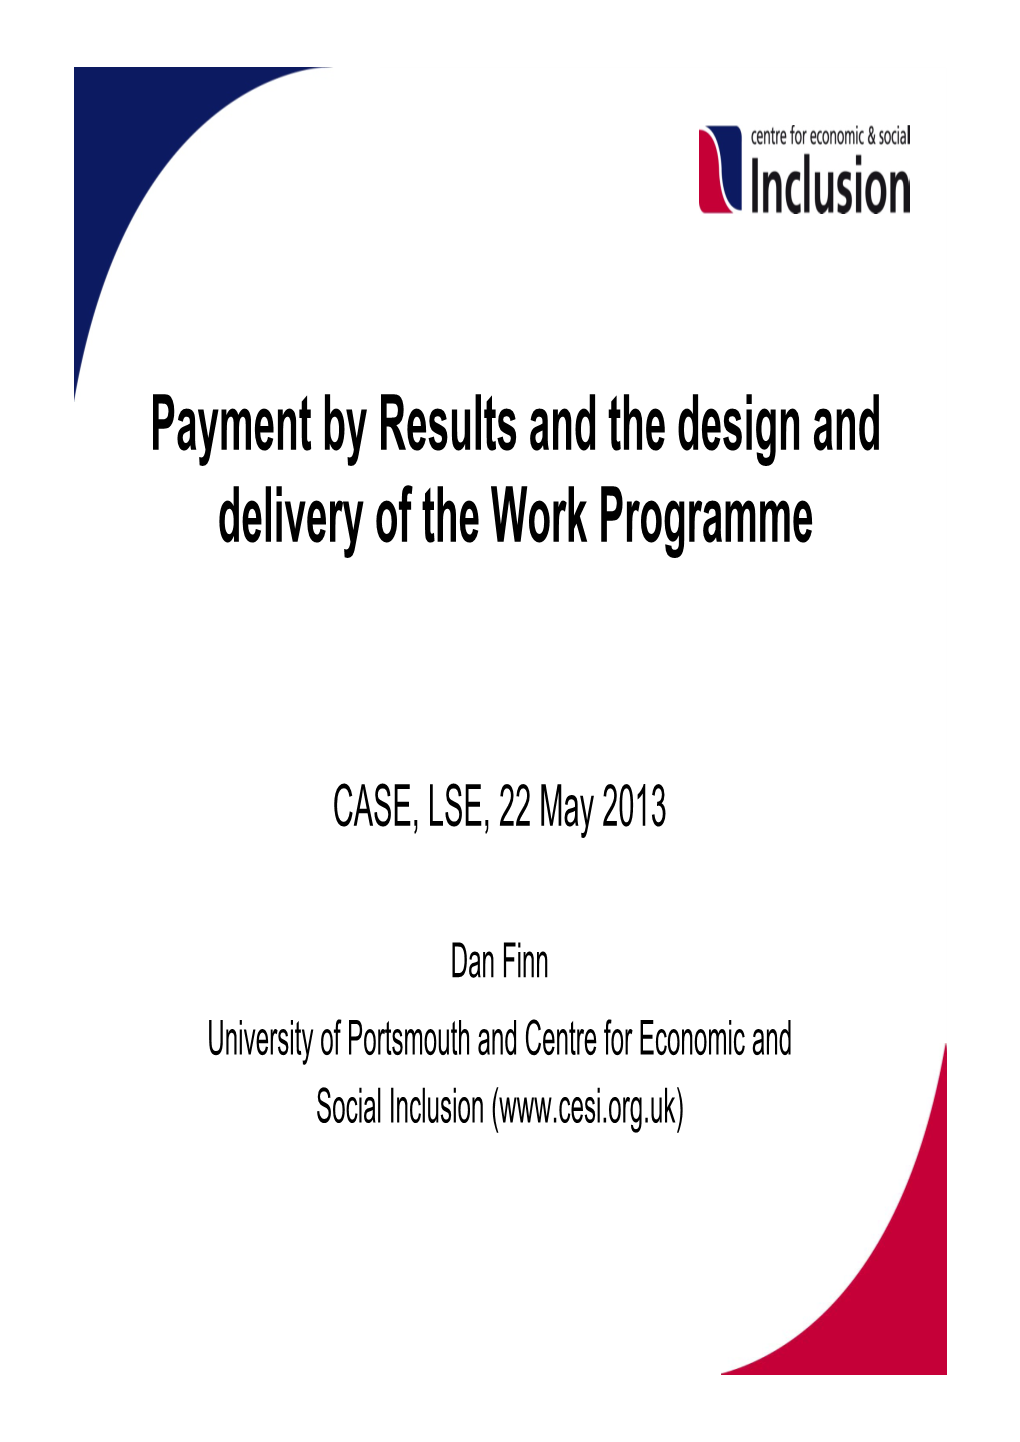 Payment by Results and the Design and Delivery of the Work Programme